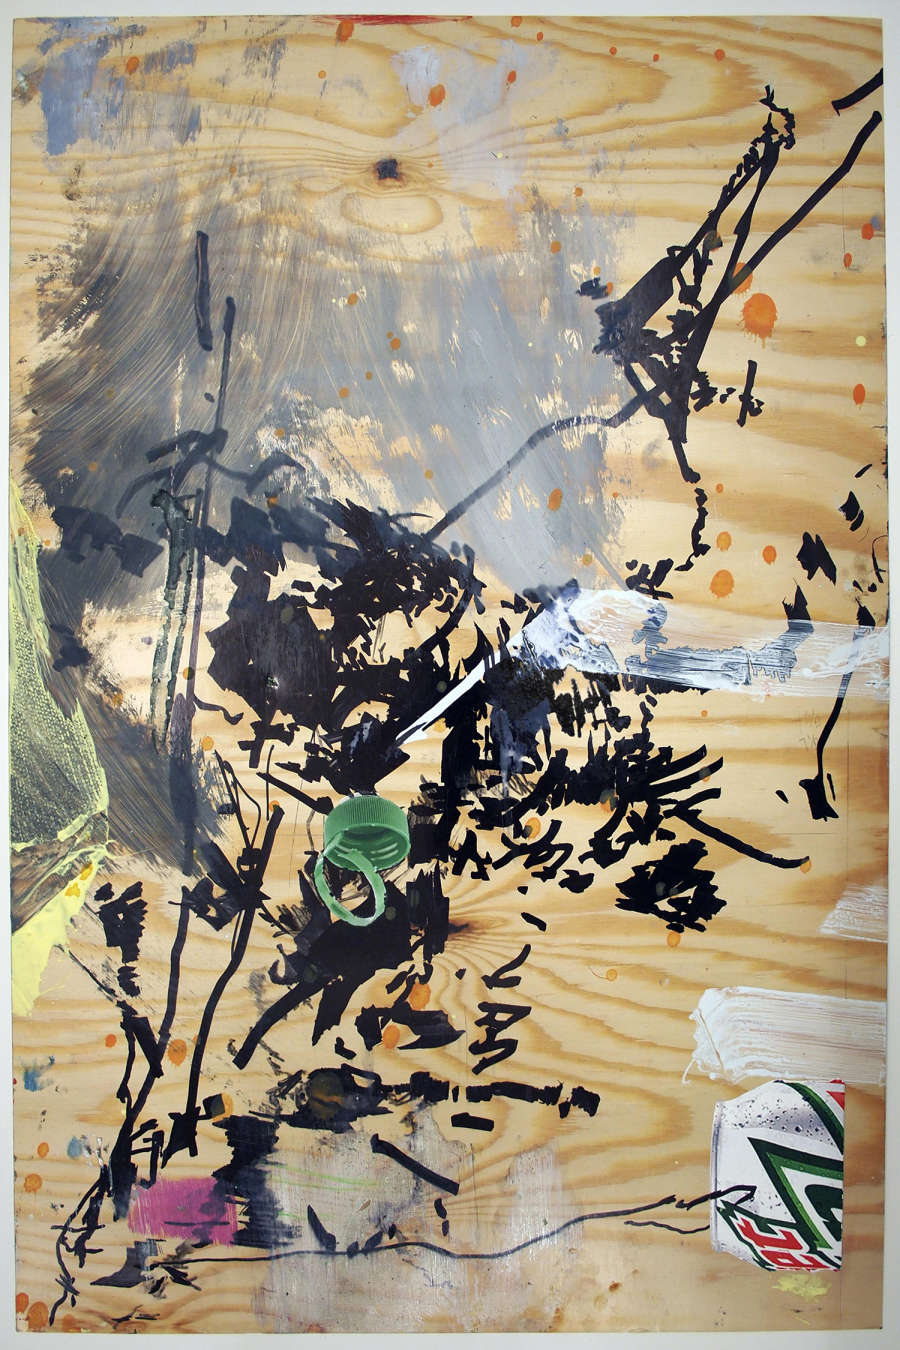 An abstract drawing depicting a series of gestural marks made by a brush. The majority of the marks are rendered in black. There is a partial cut-out of a Mountain Dew can and a bottle cap. The background resembles natural wood.